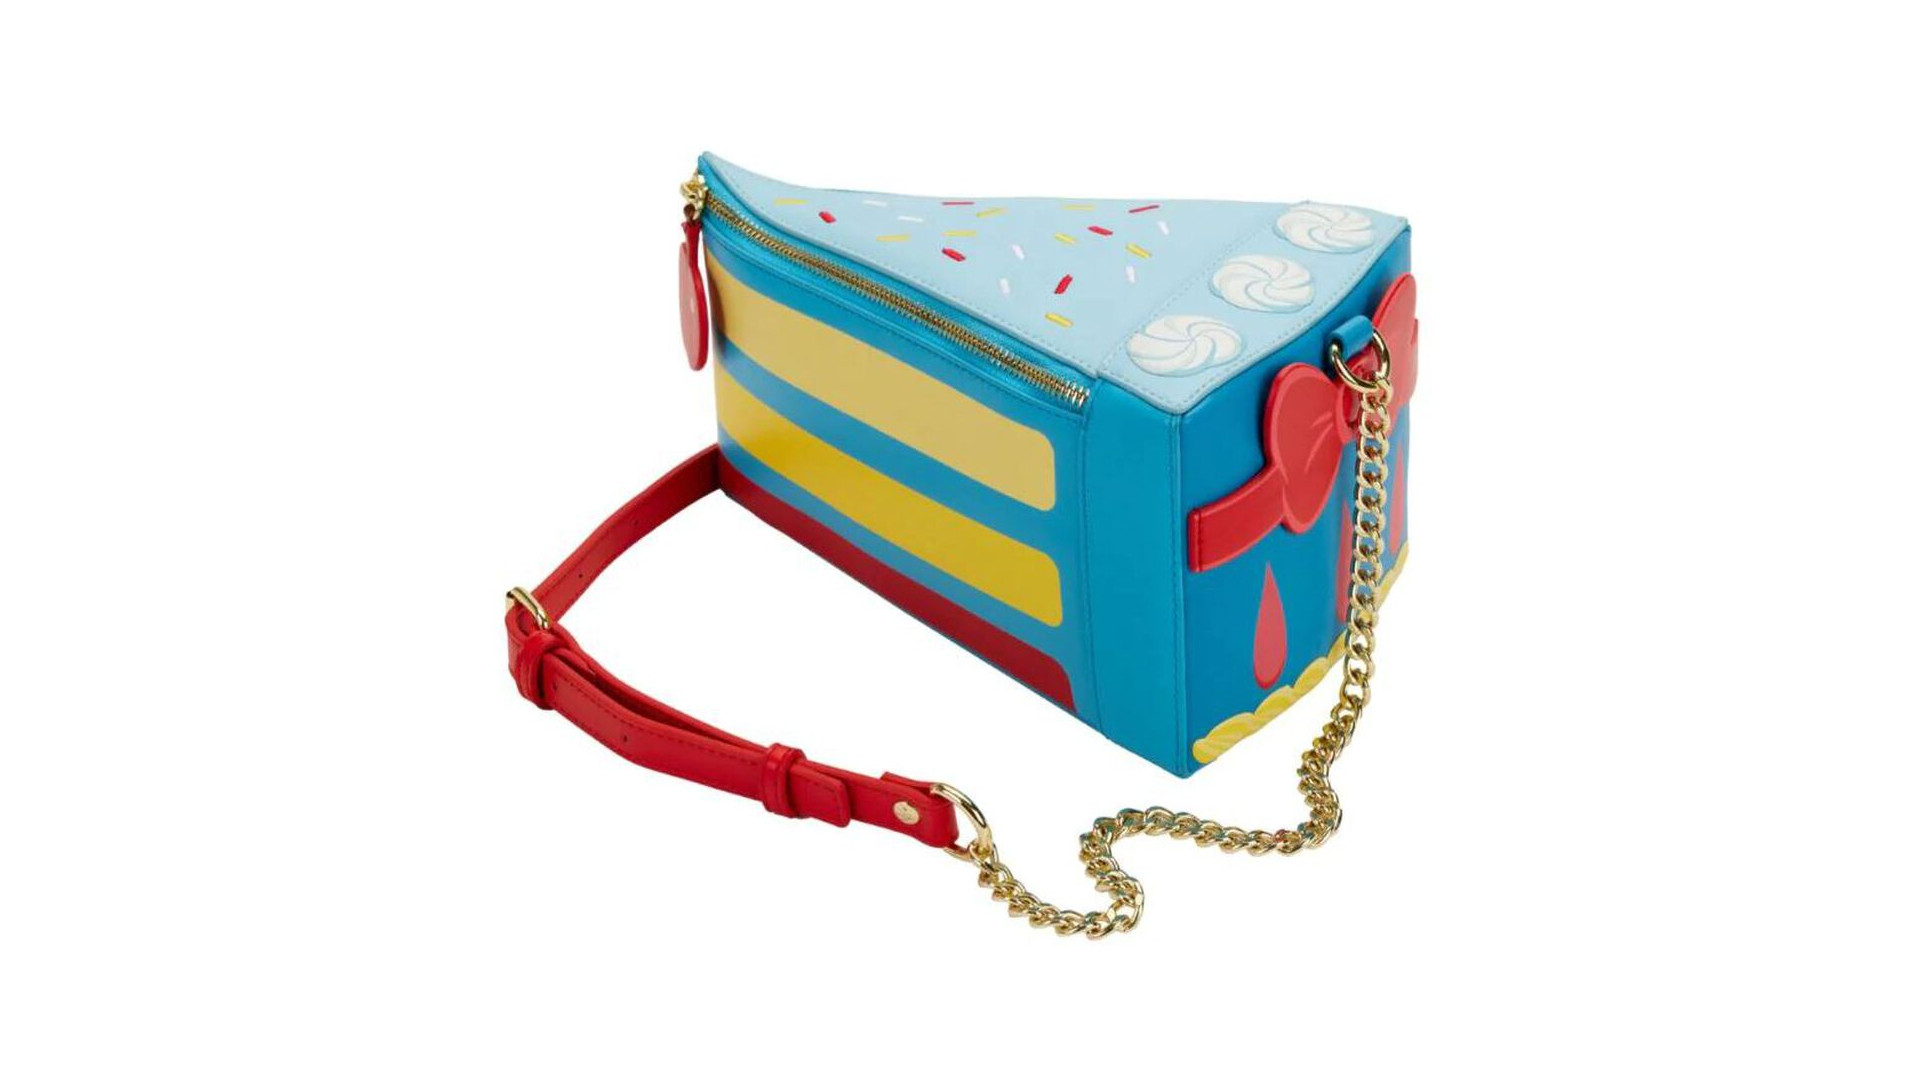 Acheter Sac A Bandouliere Loungefly - Blanche Neige - Cake